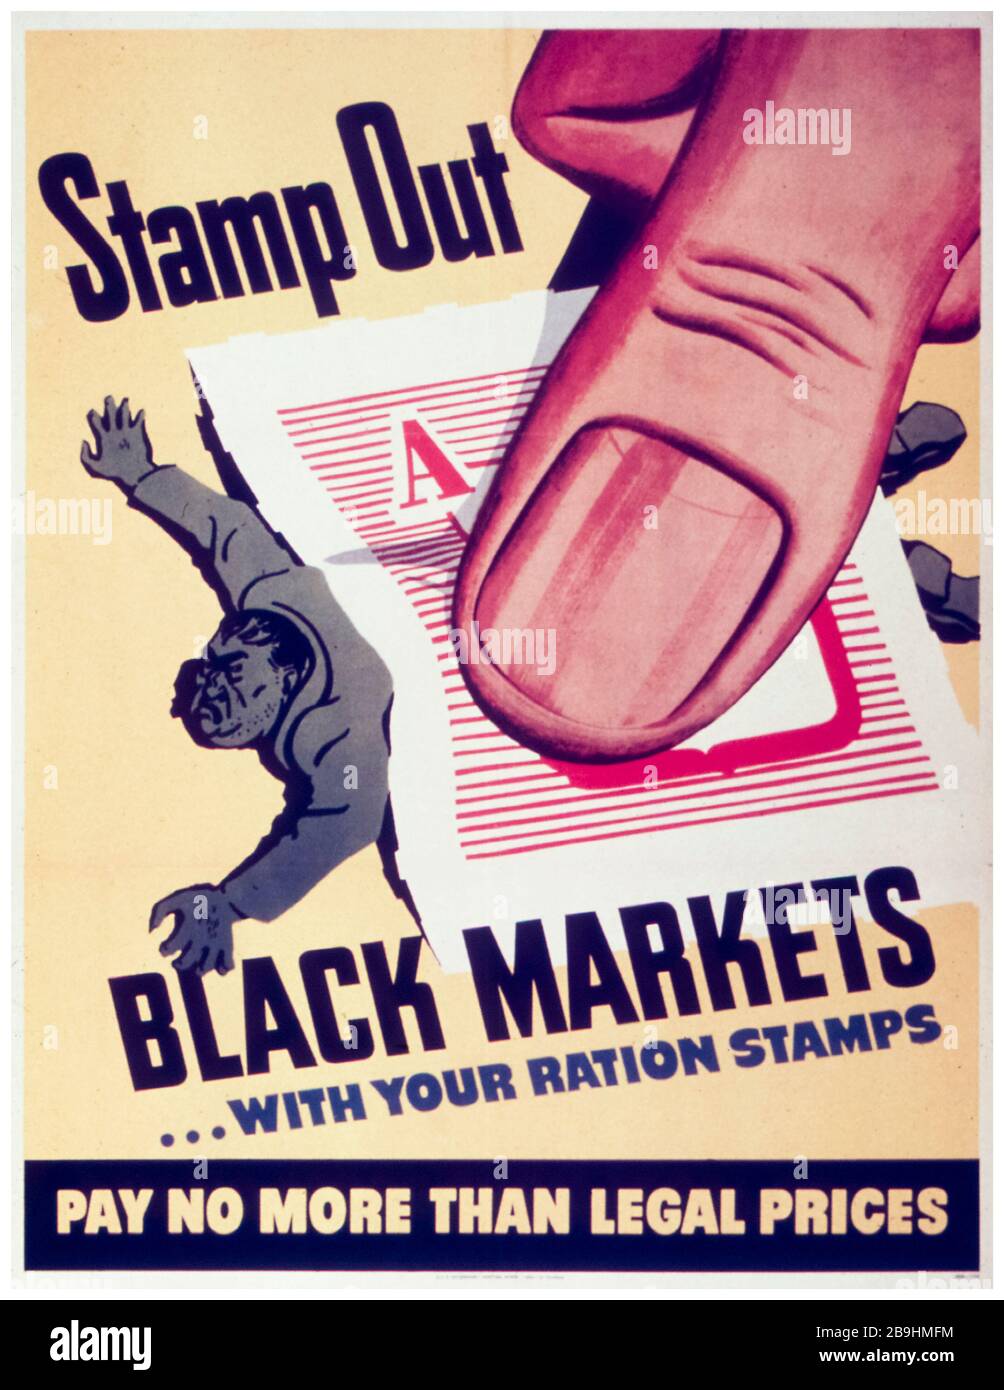 US WW2 Food Rationing, Stempel out Black Markets with your Ration Stempels, Profiteering Poster, 1941-1945 Stockfoto